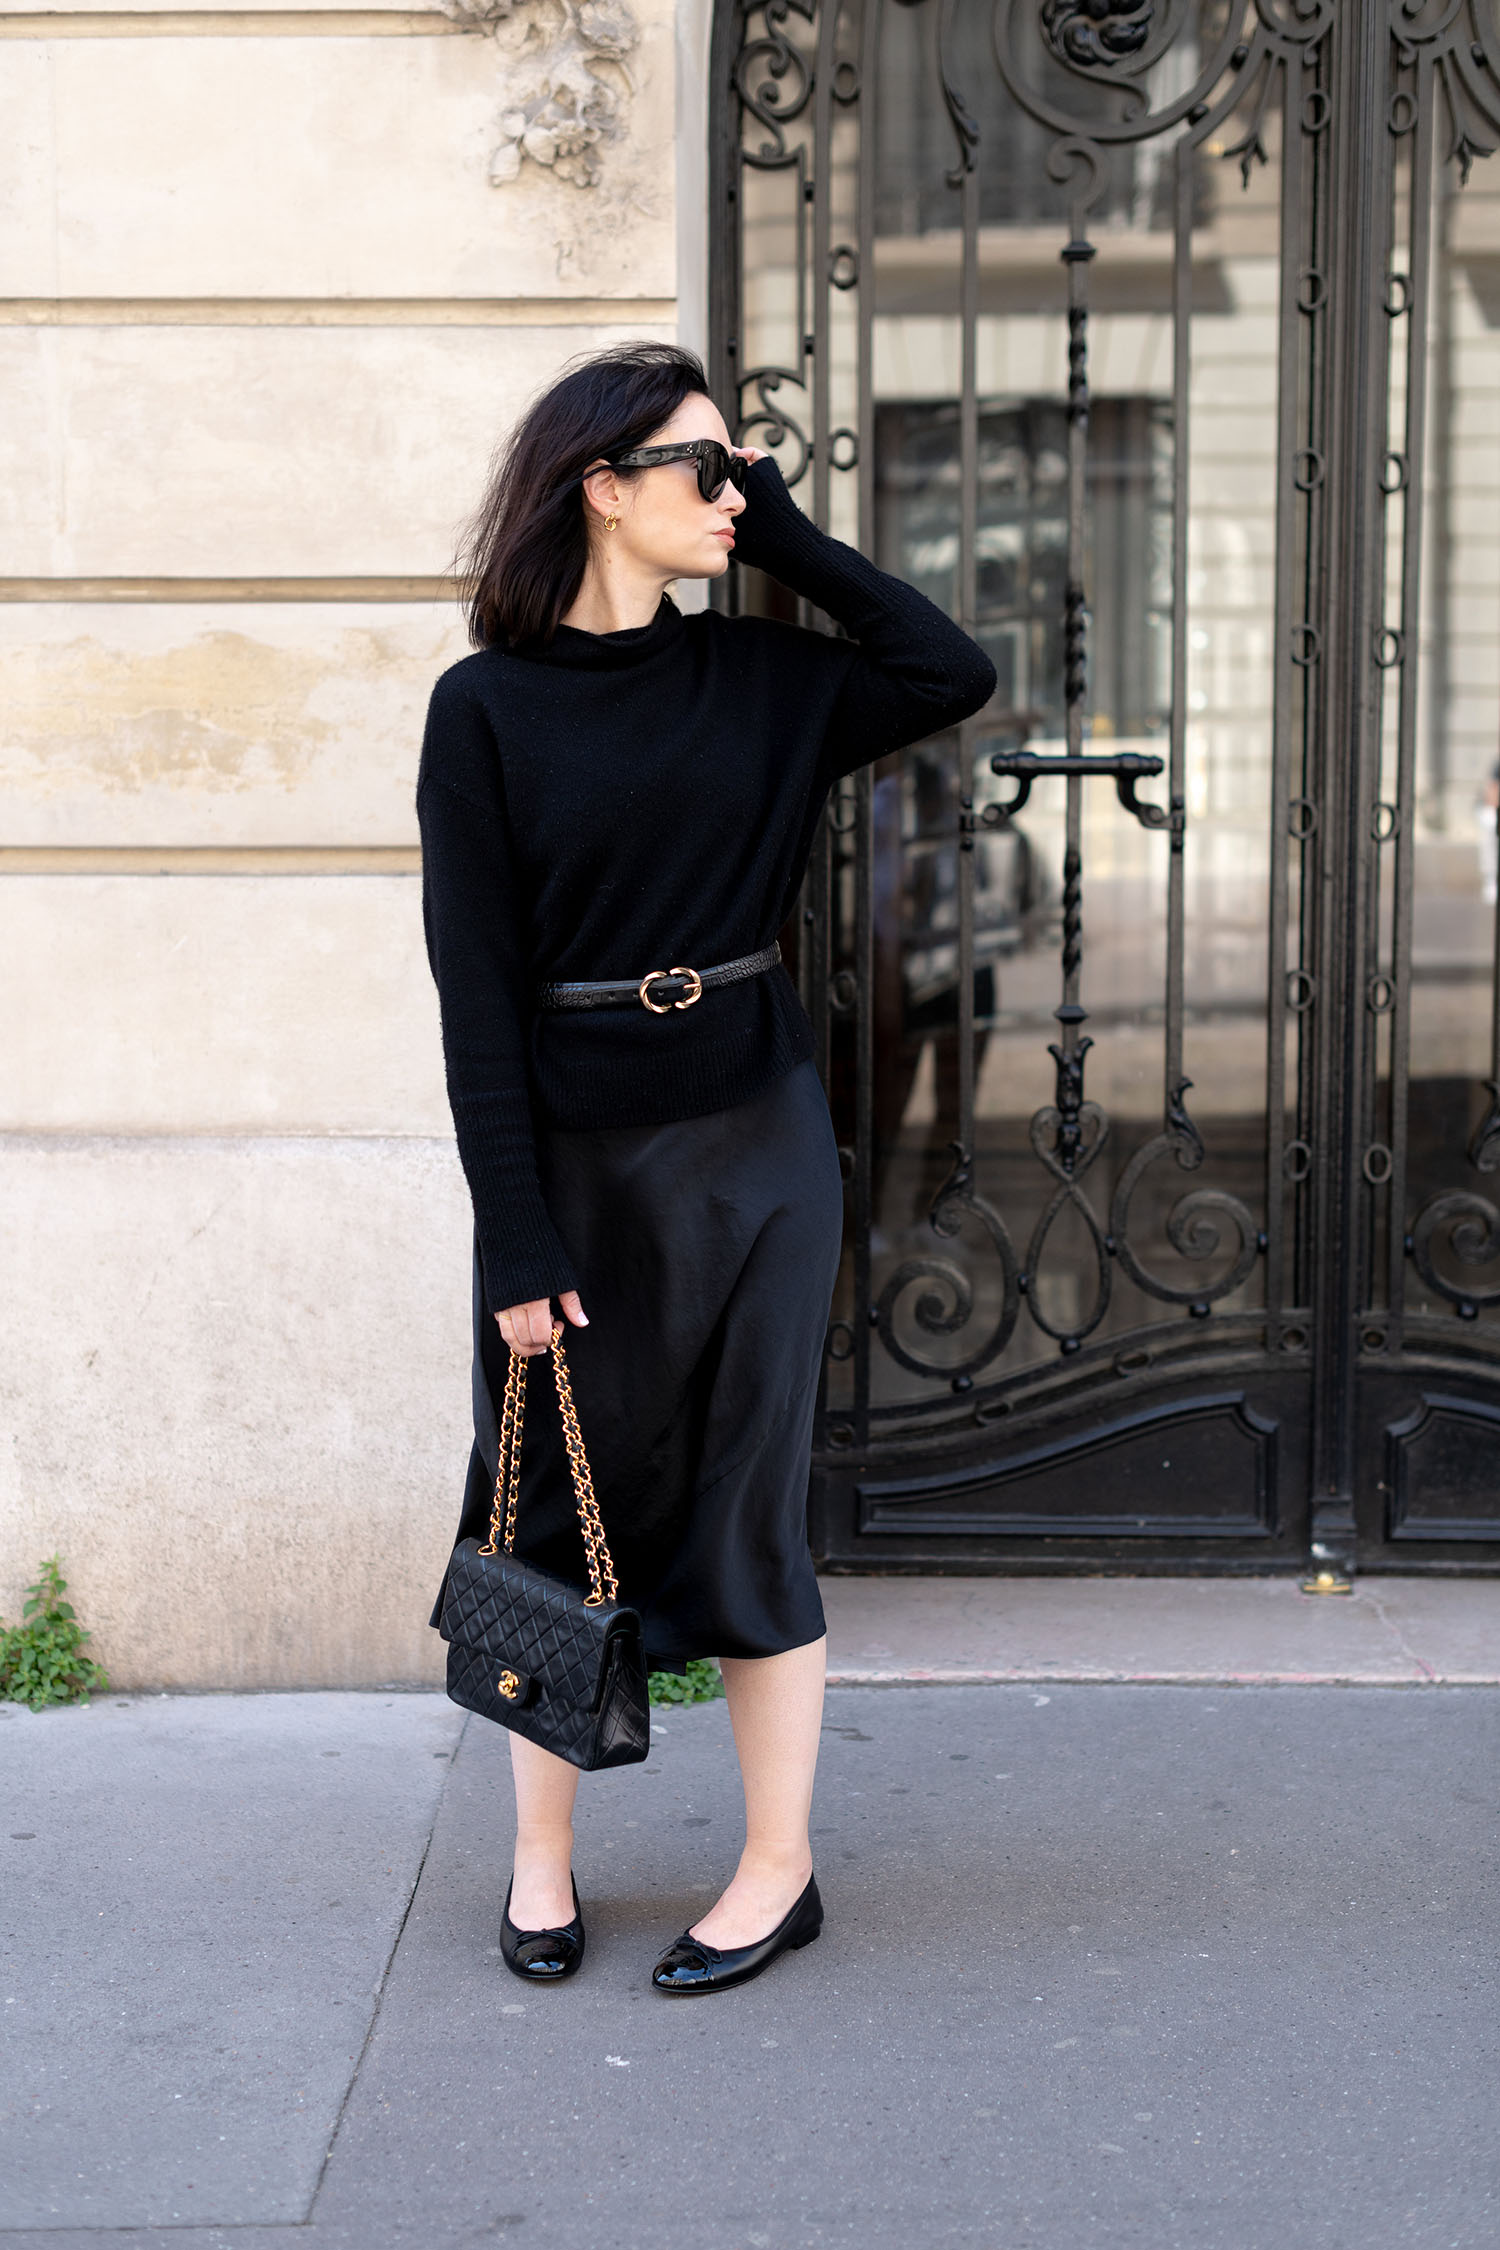 Coco & Voltaire - Chanel ballet flats, Celine sunglasses, Wilfred sweater